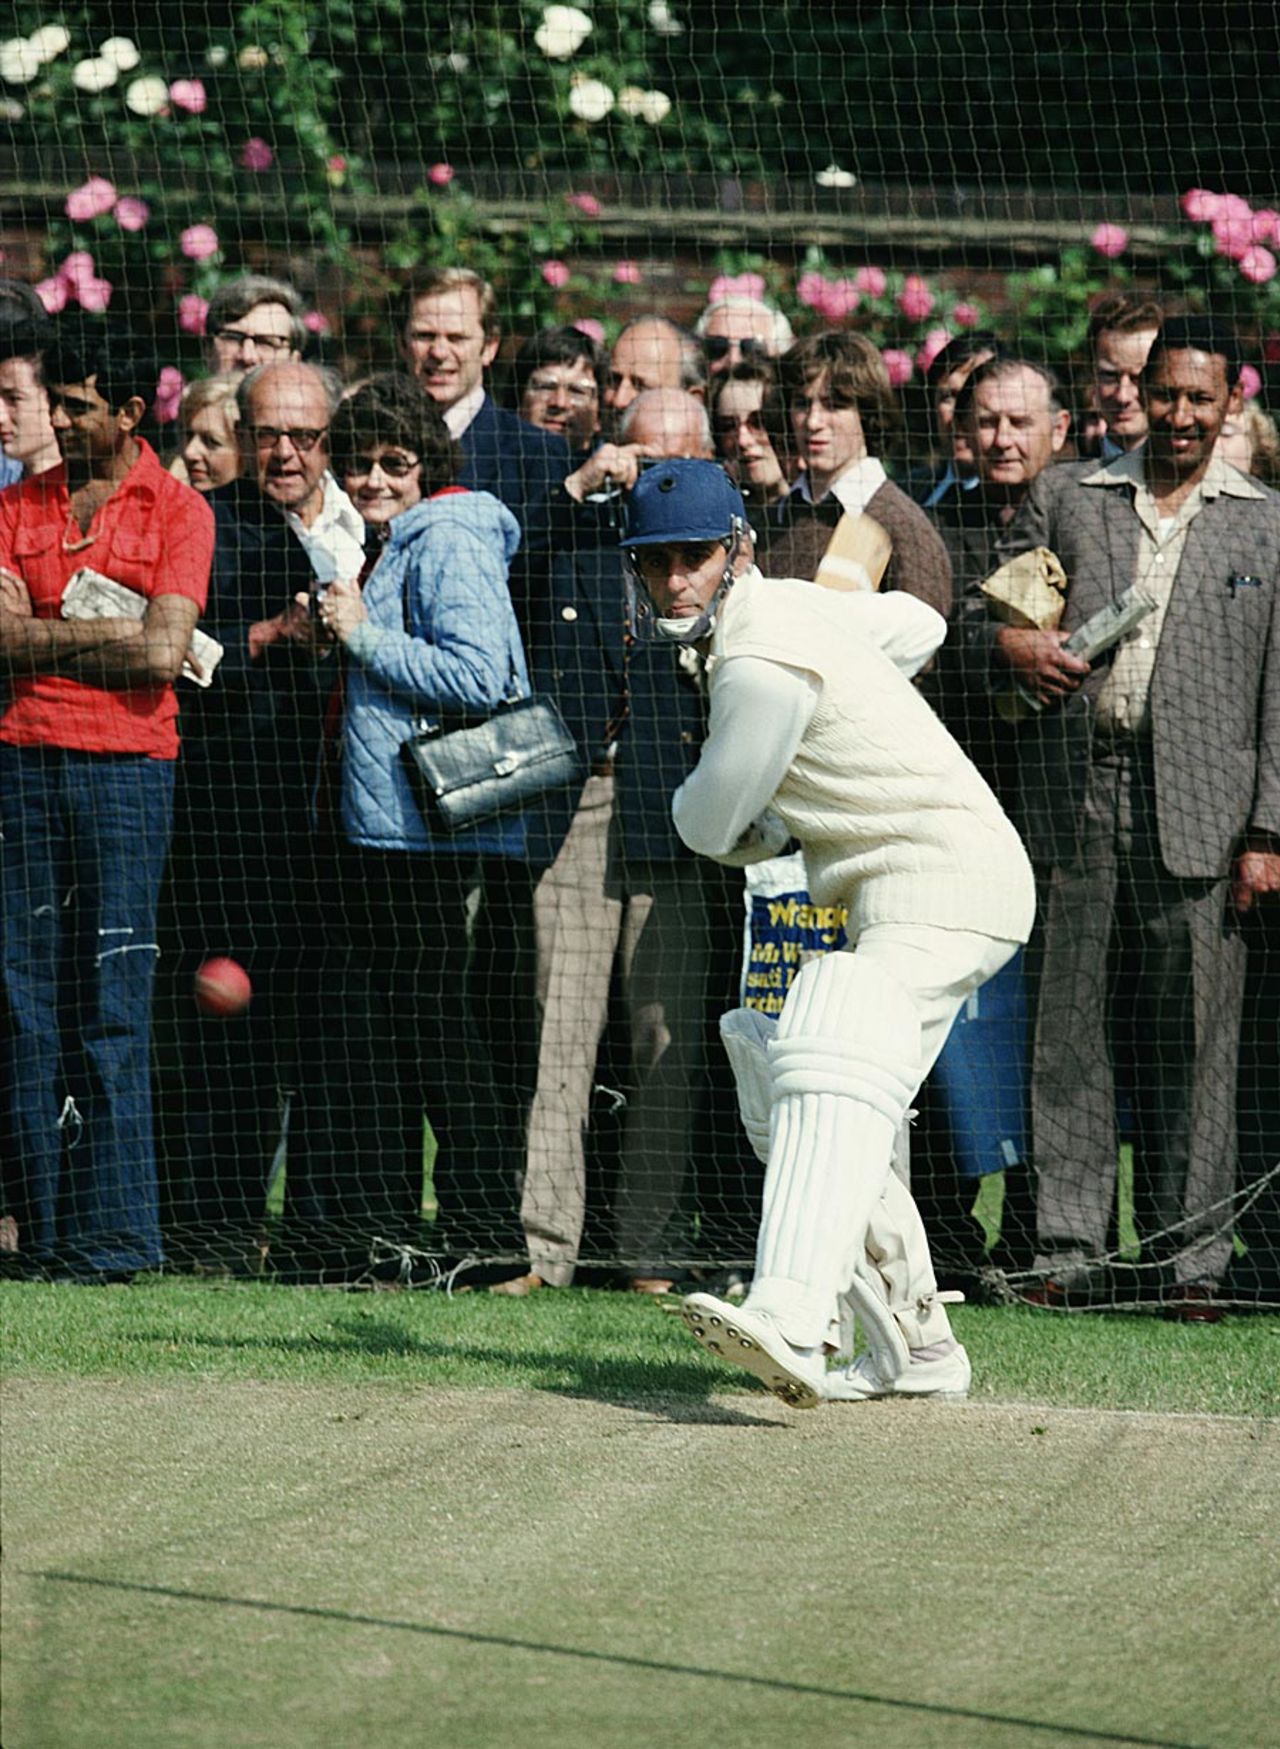 Mike Brearley bats at the nets, London, June 21, 1979